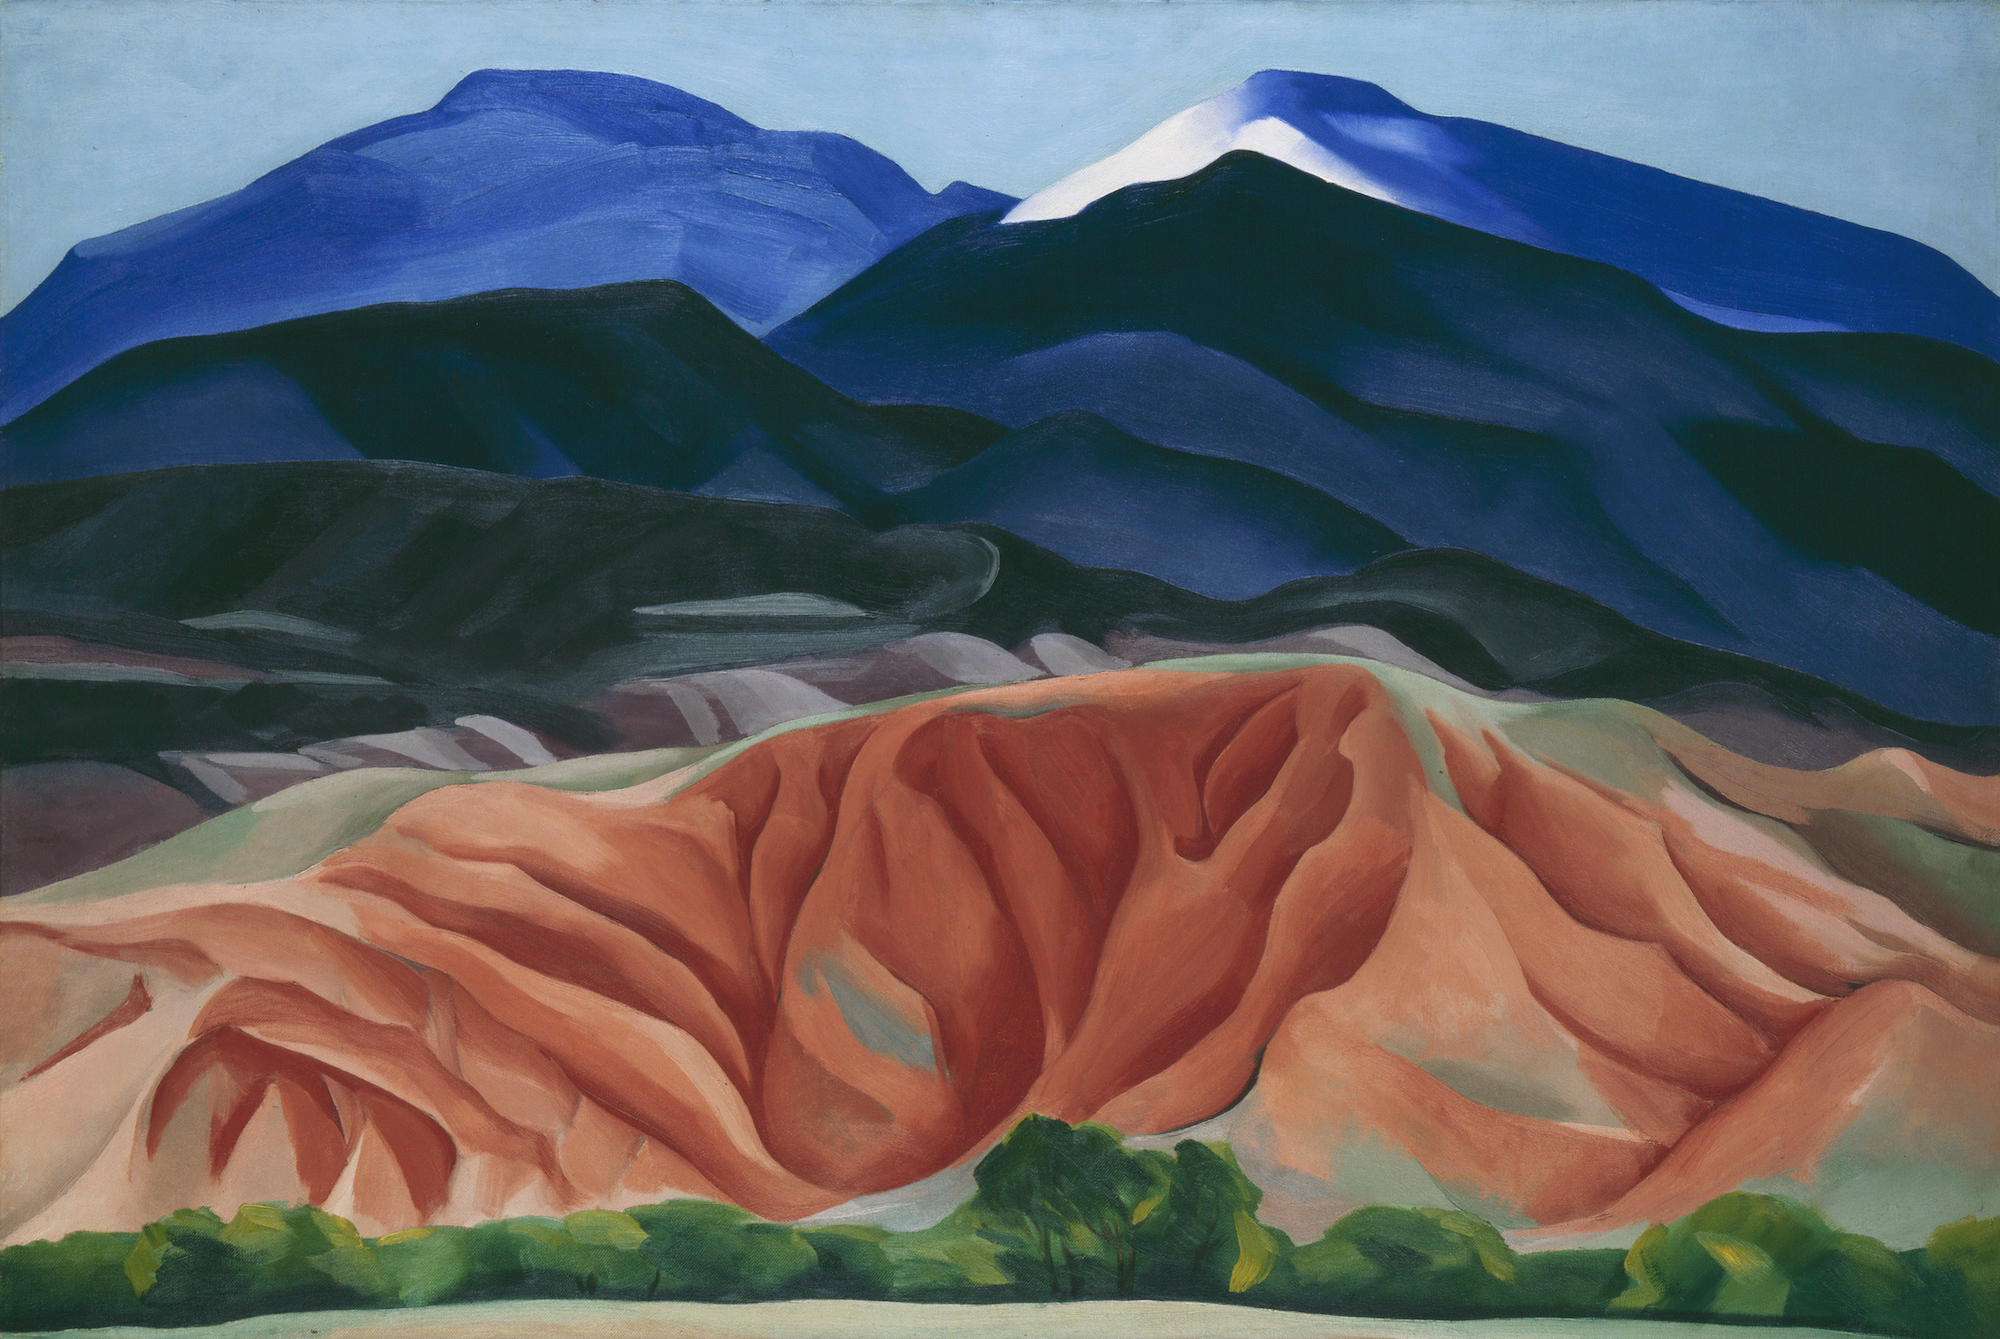 Georgia O'Keeffe. Black Mesa Landscape, New Mexico / Out Back of Marie's II, 1930. Oil on canvas, 24 1/4 x 36 1/4 inches. Georgia O'Keeffe Museum. Gift of The Burnett Foundation Â© Georgia O'Keeffe Museum